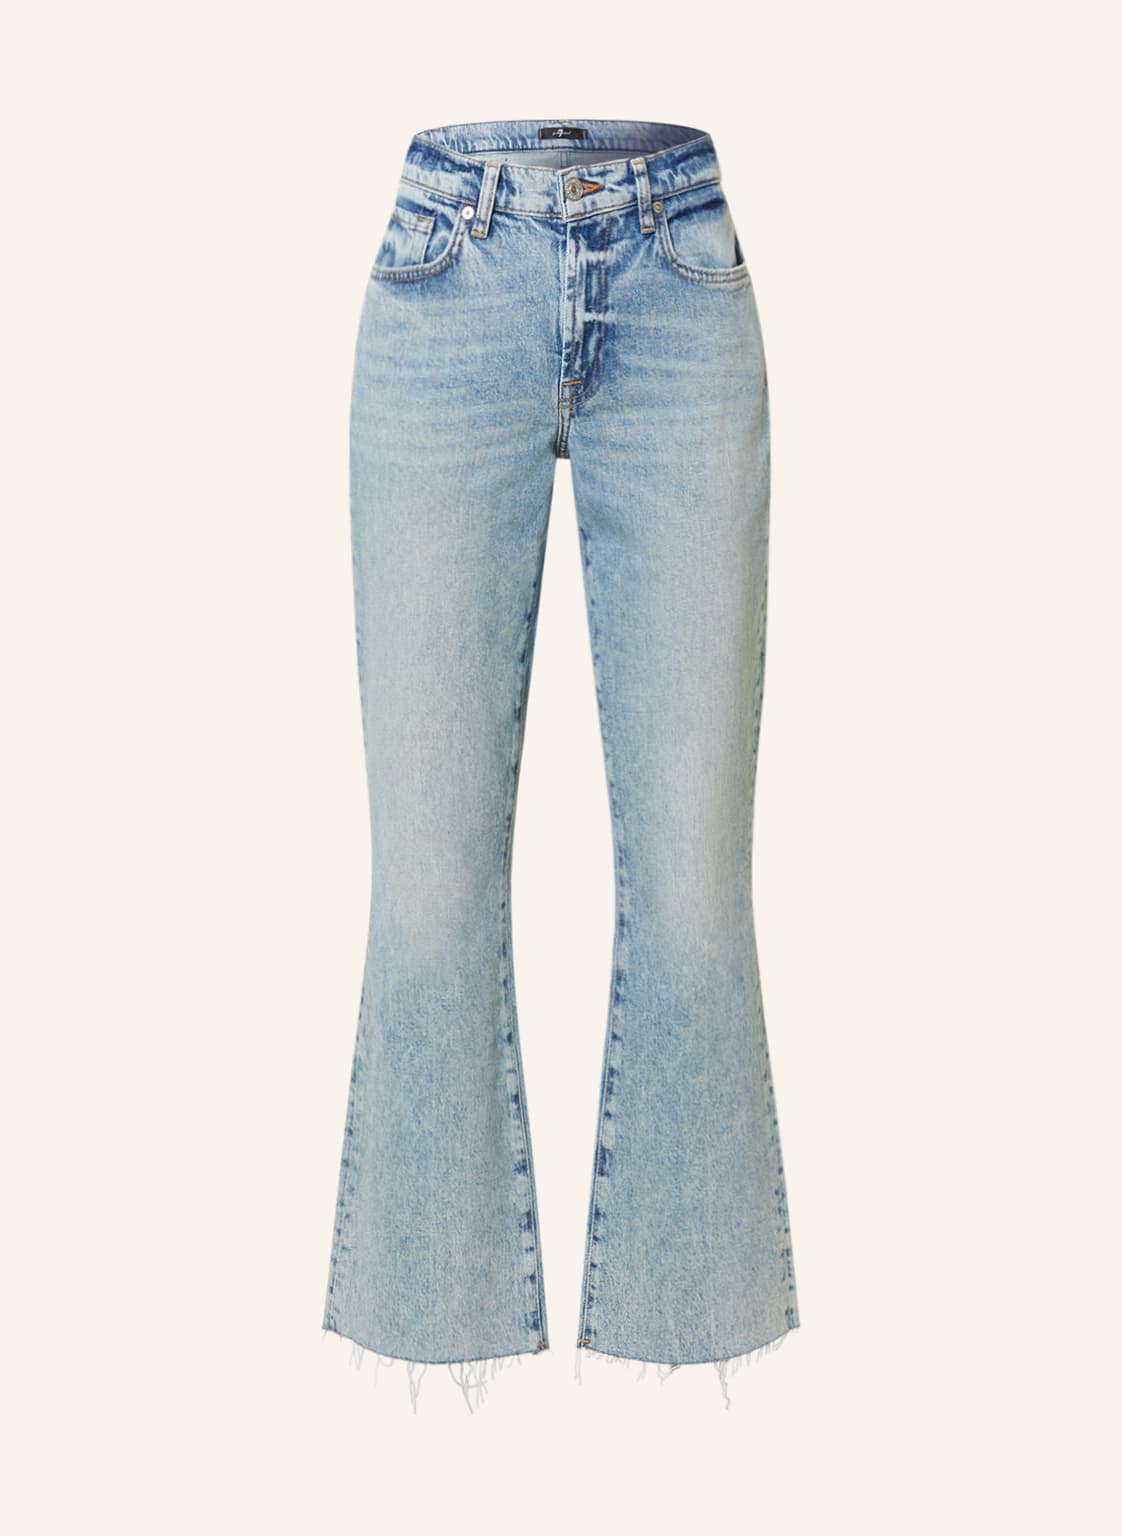 7 For All Mankind Bootcut Jeans Betty blau von 7 For All Mankind